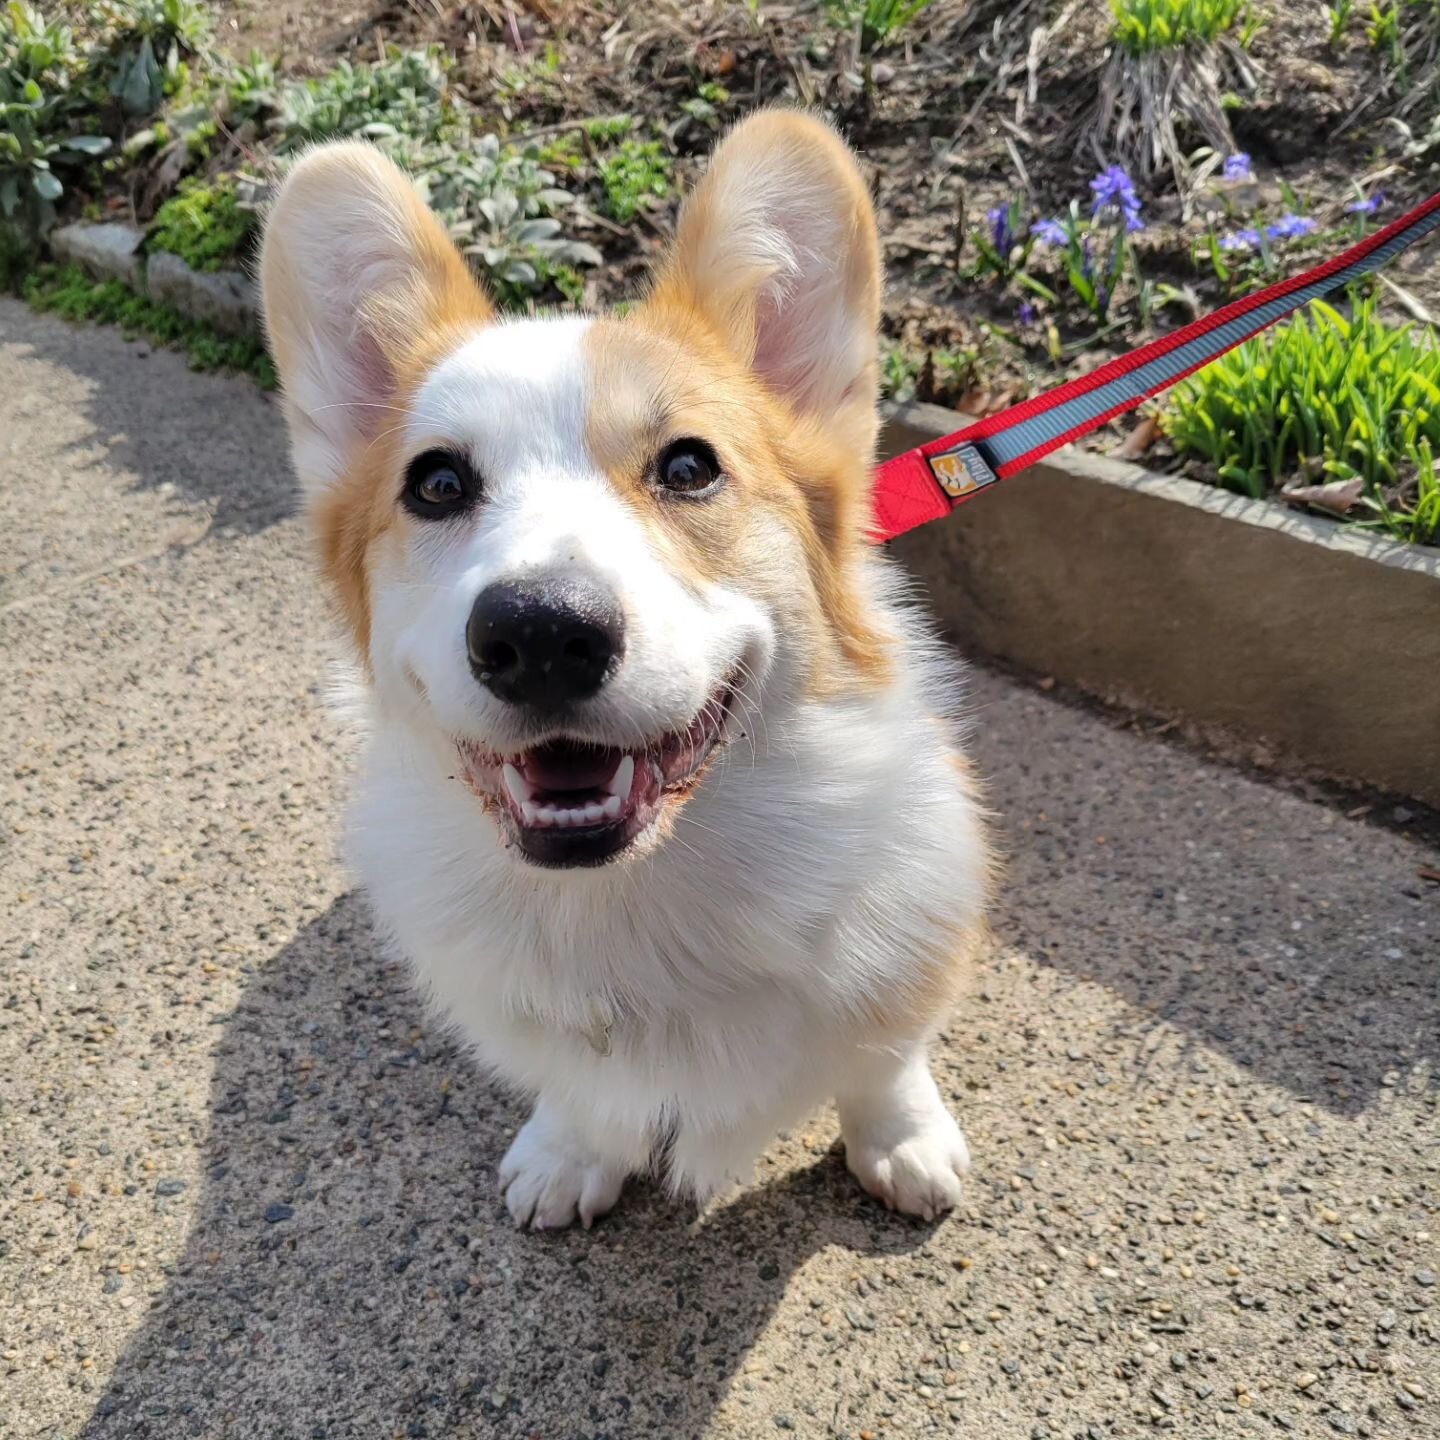 Pics from Training Ozzy! 
.
.
.
#corgie #training #corgiepuppy #corgiepuppylife #dogtraininglife #dogtrainers #cute #cutepuppygoals #clickertrainingdogs #phillypetbusinesses